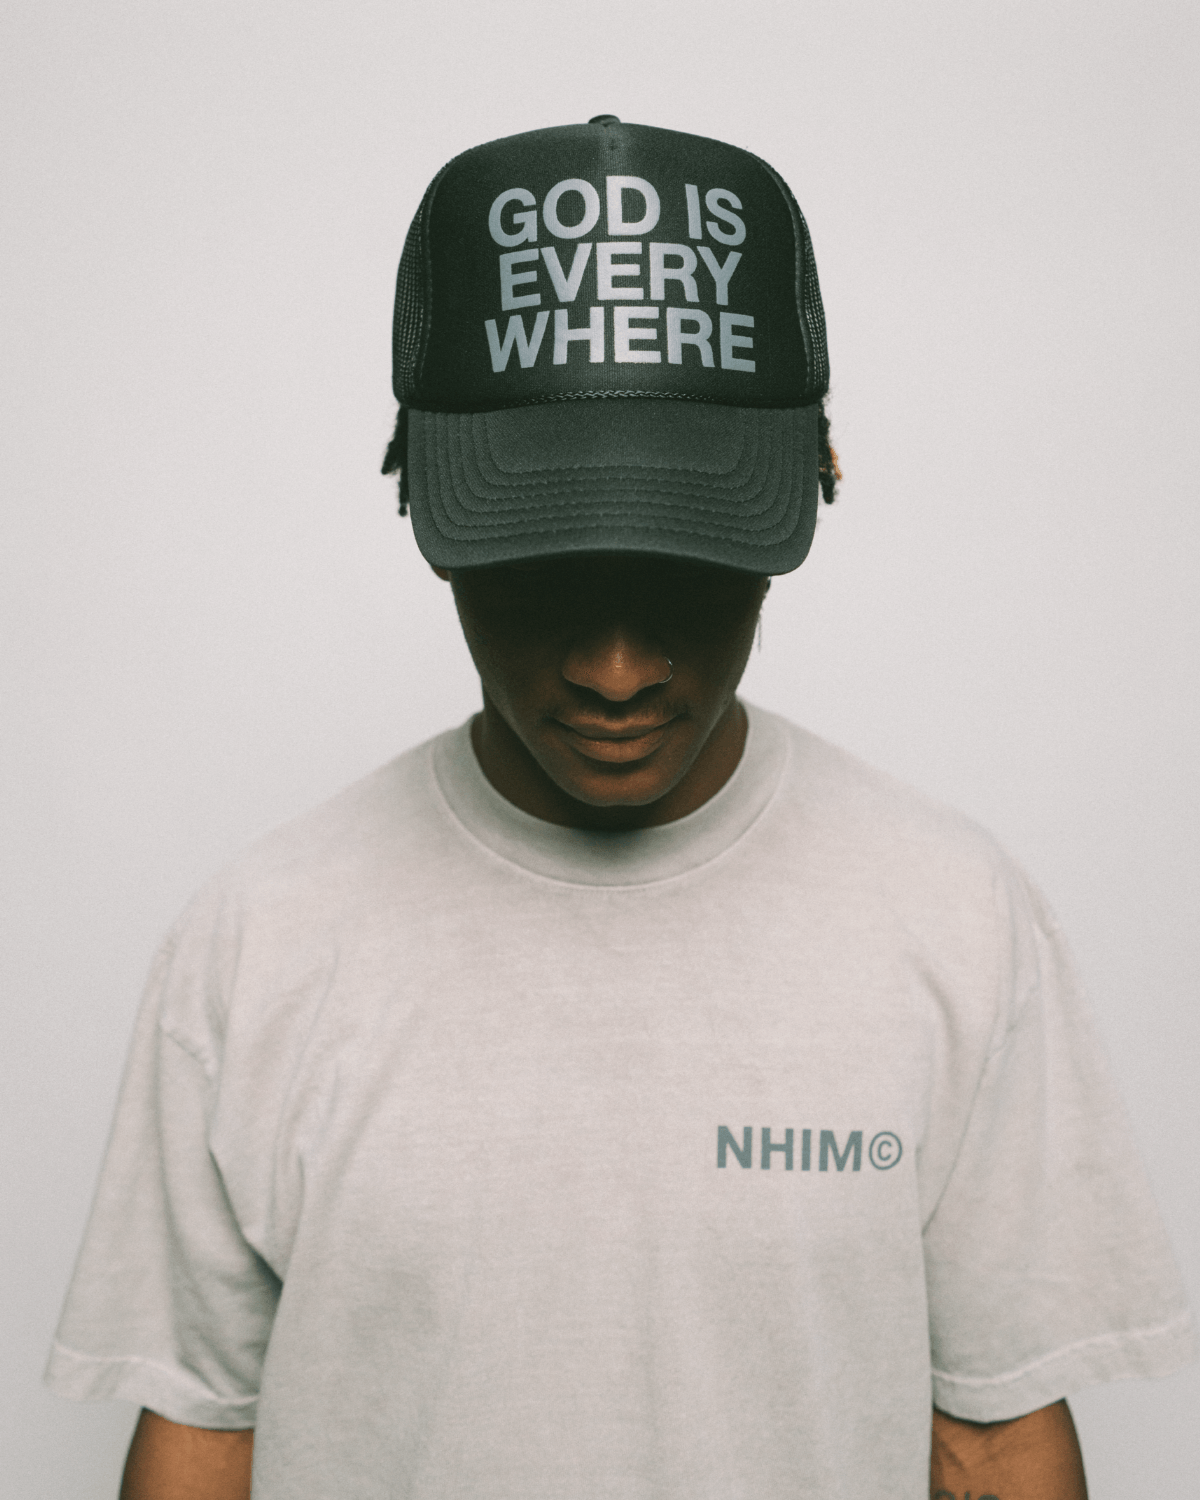 GOD IS EVERYWHERE PREMIUM CHRISTIAN APPAREL COLLECTION. Black trucker hat and cement shirt by NHIM APPAREL